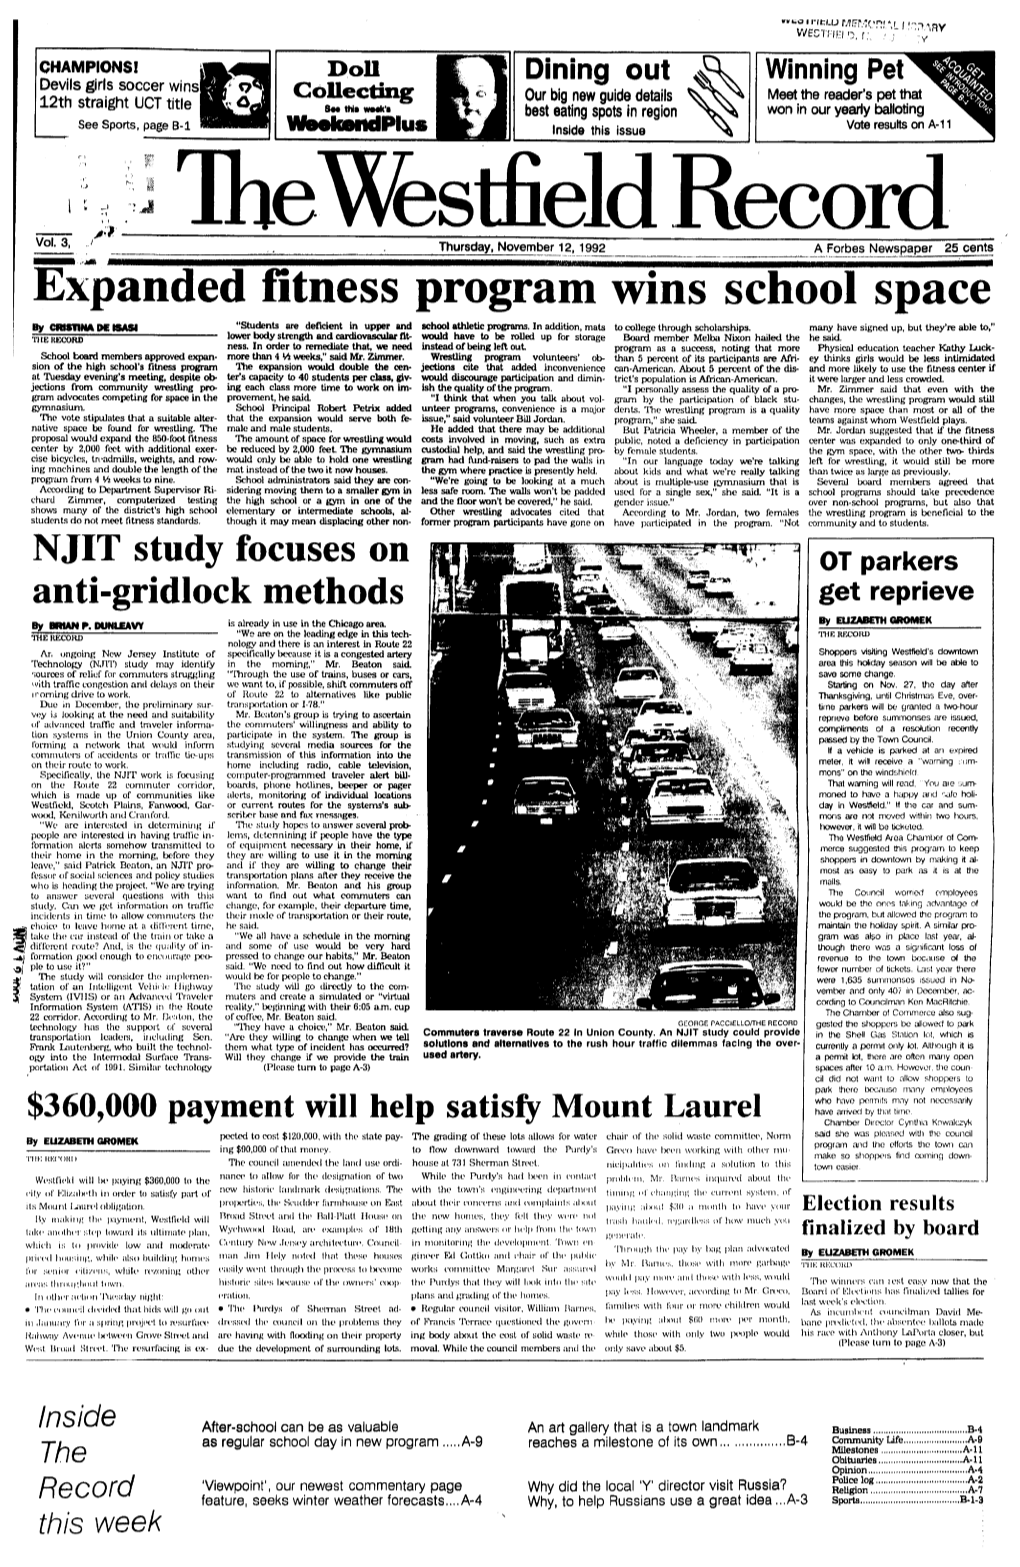 Expanded Fitness Program Wins School Space by Cmnm PC ISASI "Students Are Deficient in Upper and School Athletic Programs